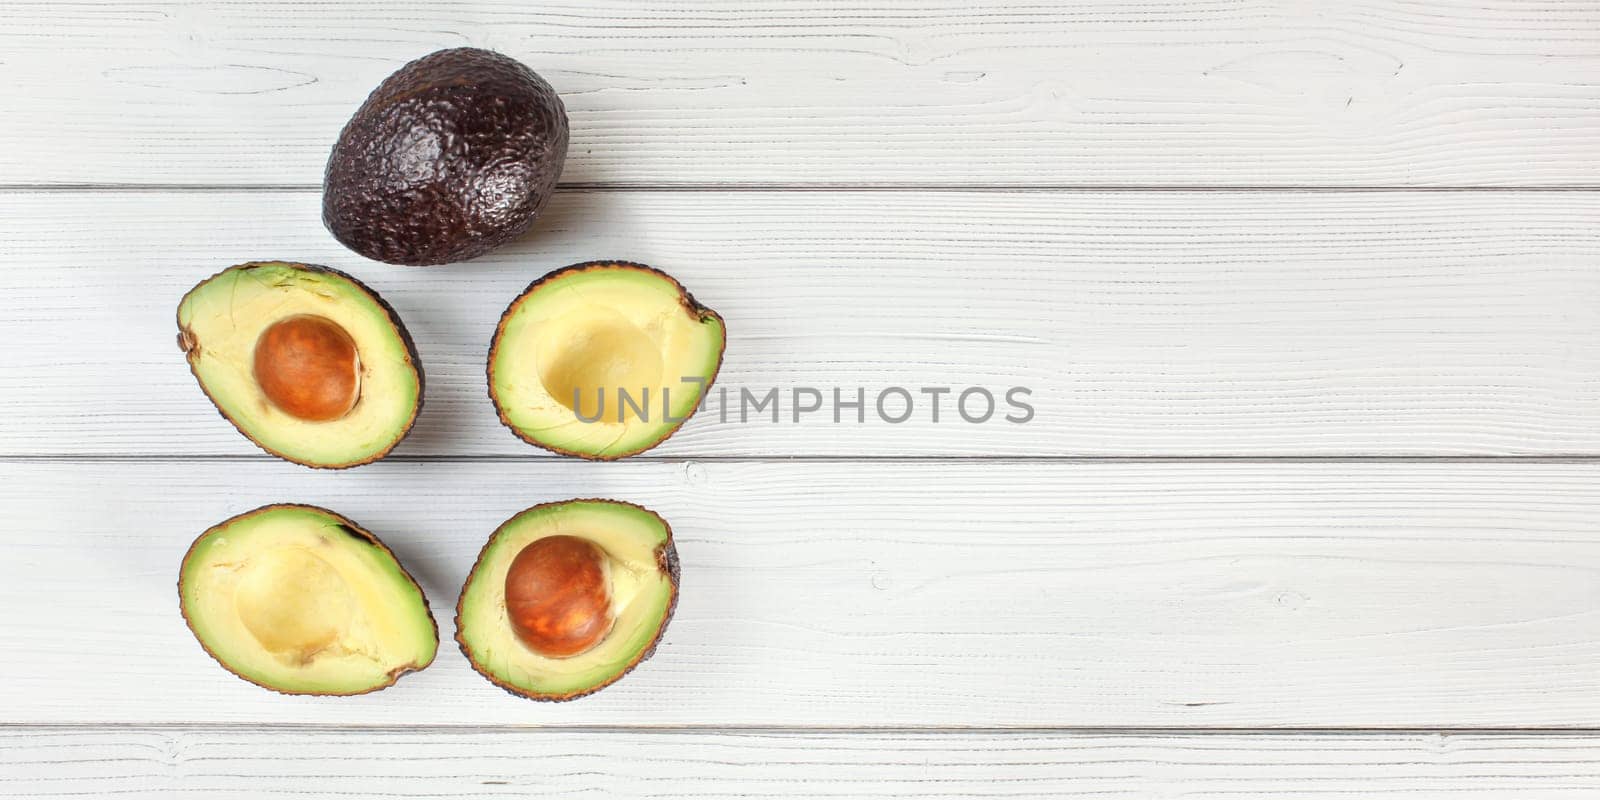 Ripe avocado halves and one whole fruit arranged on white boards desk, view from above - wide photo with space for text right side